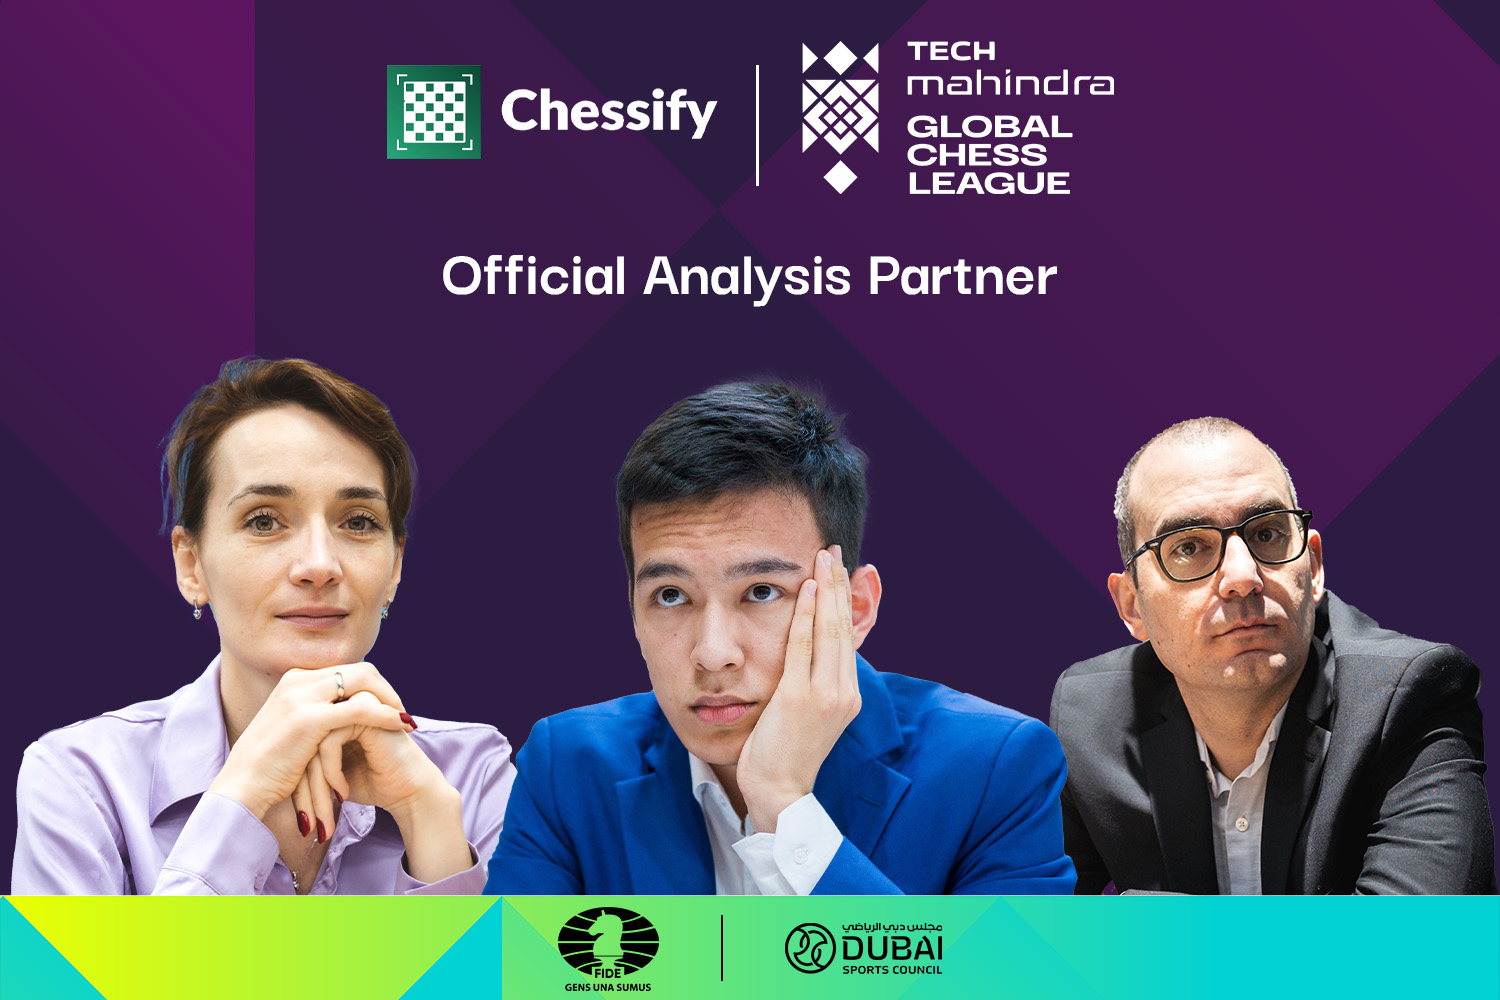 Chessify teams up with Global Chess League